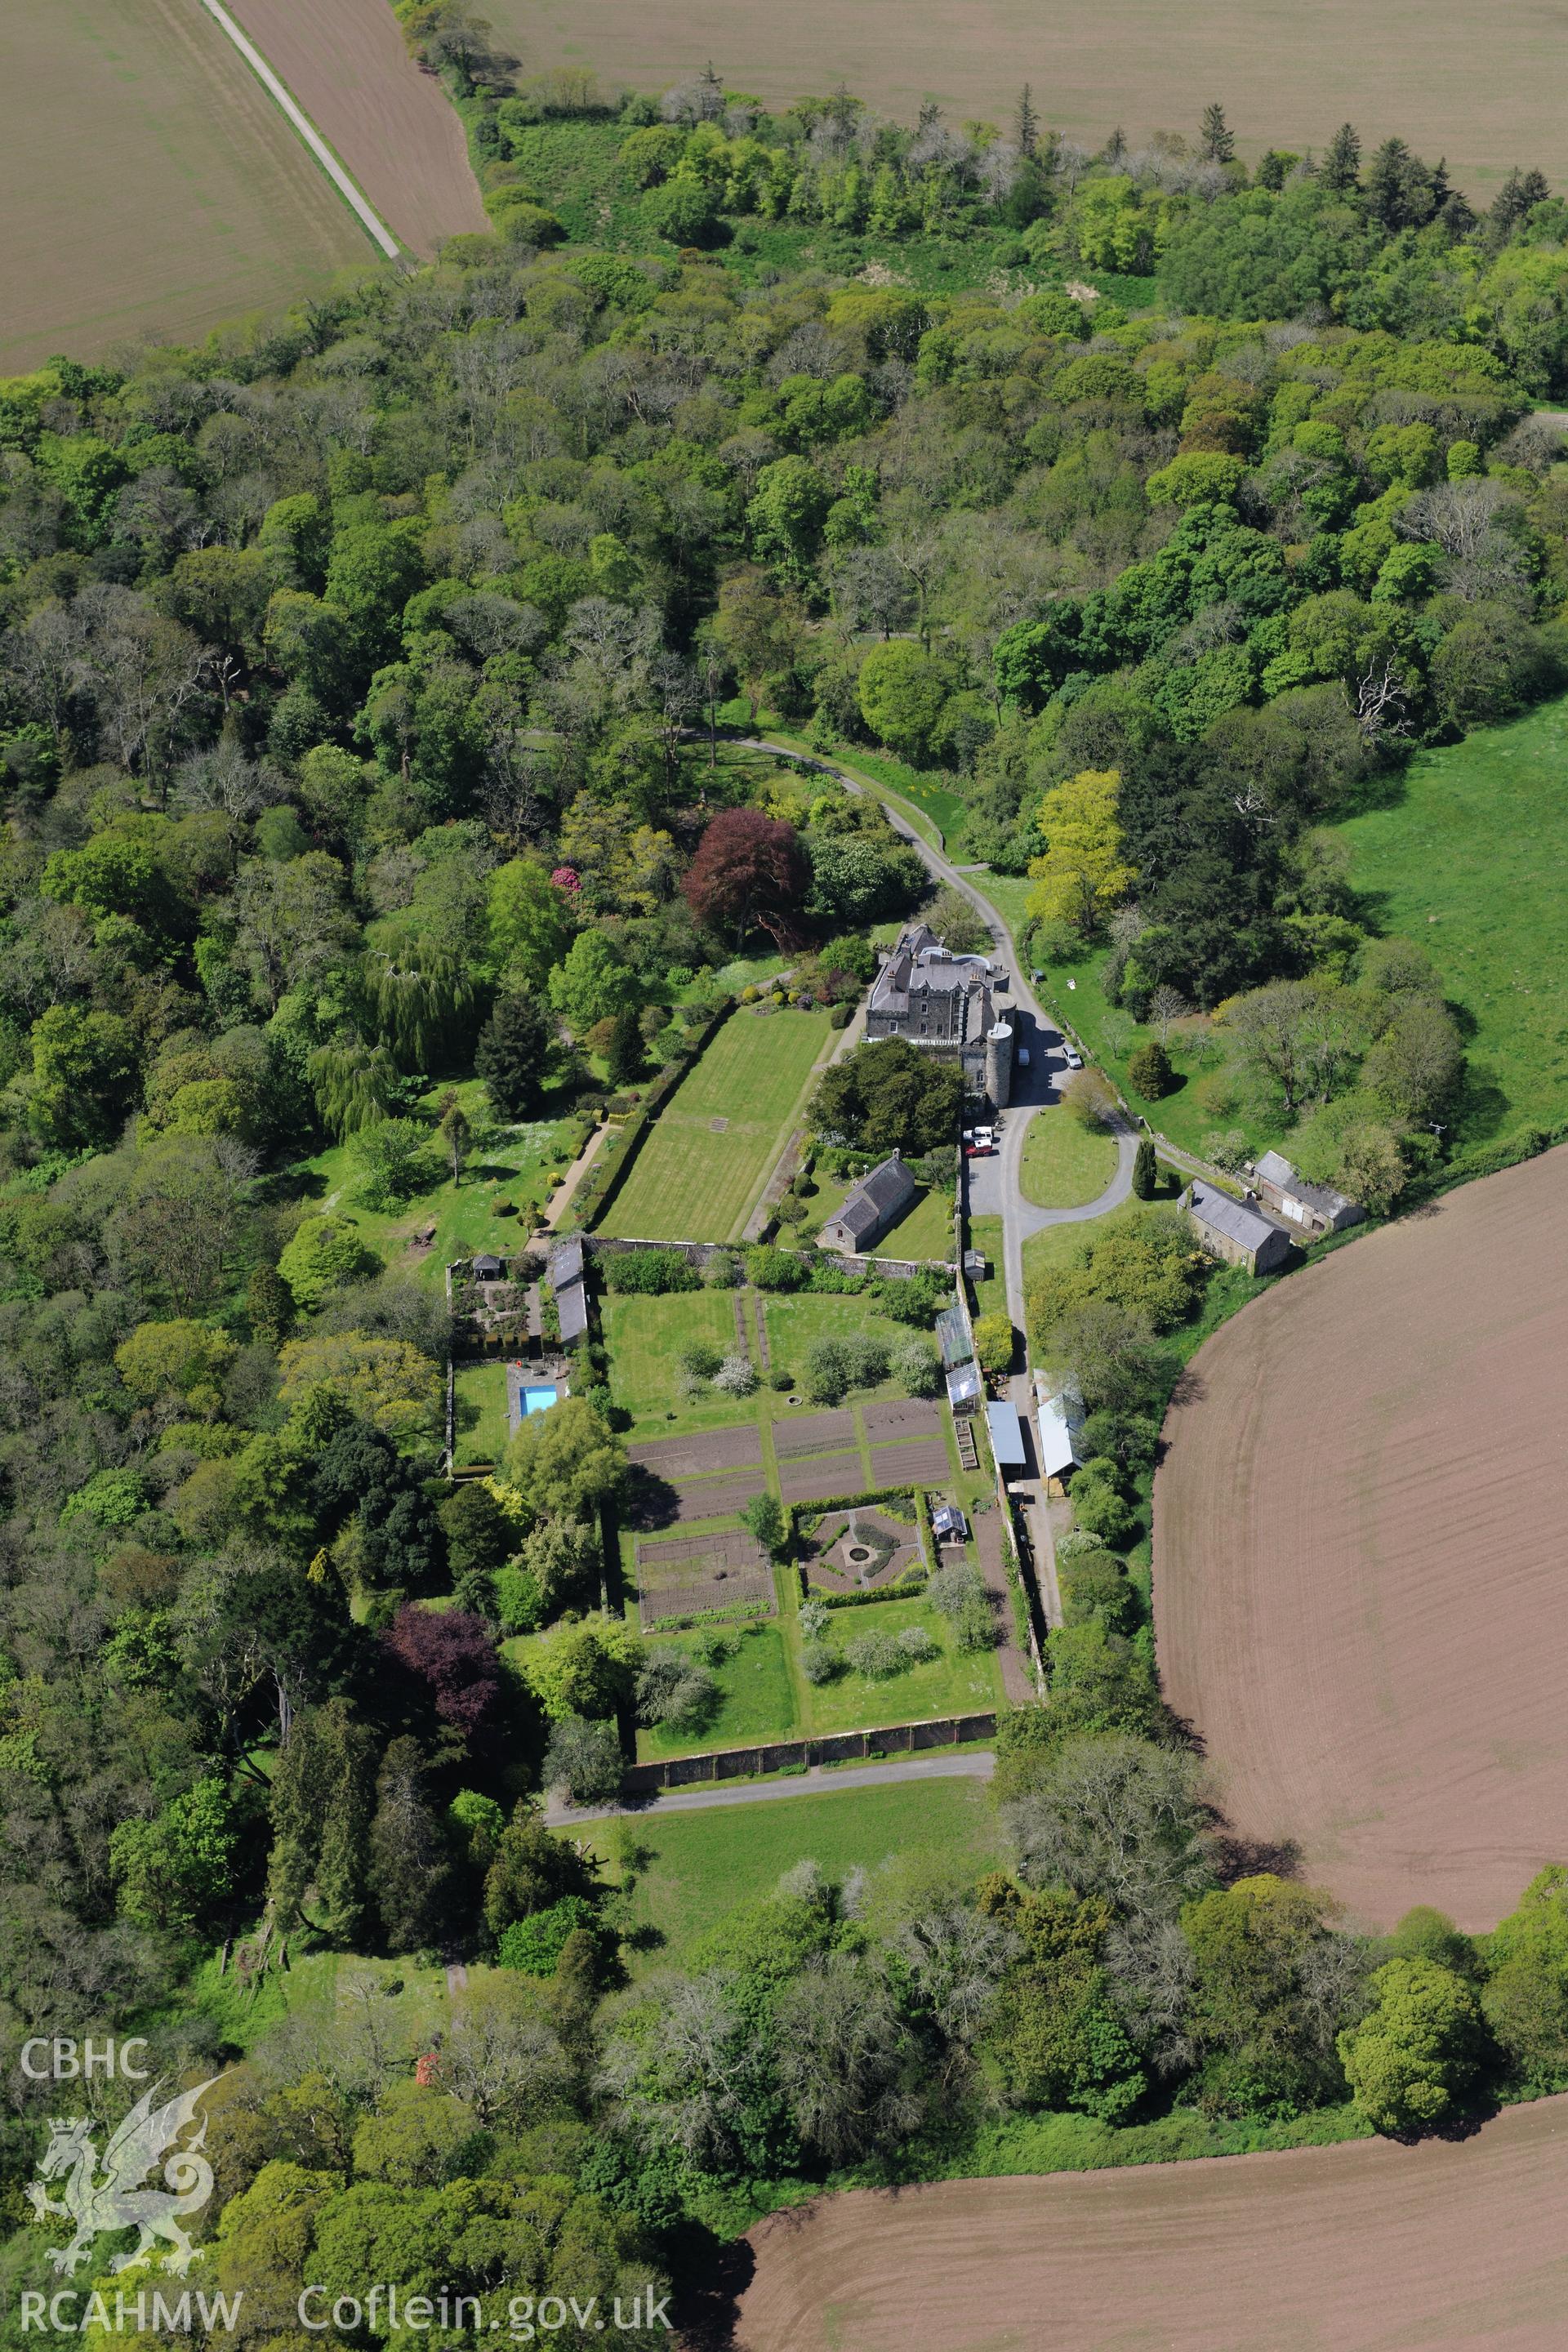 Upton Castle and Gardens, and Upton Chapel, near Cosheston, Pembroke Dock. Oblique aerial photograph taken during the Royal Commission's programme of archaeological aerial reconnaissance by Toby Driver on 13th May 2015.